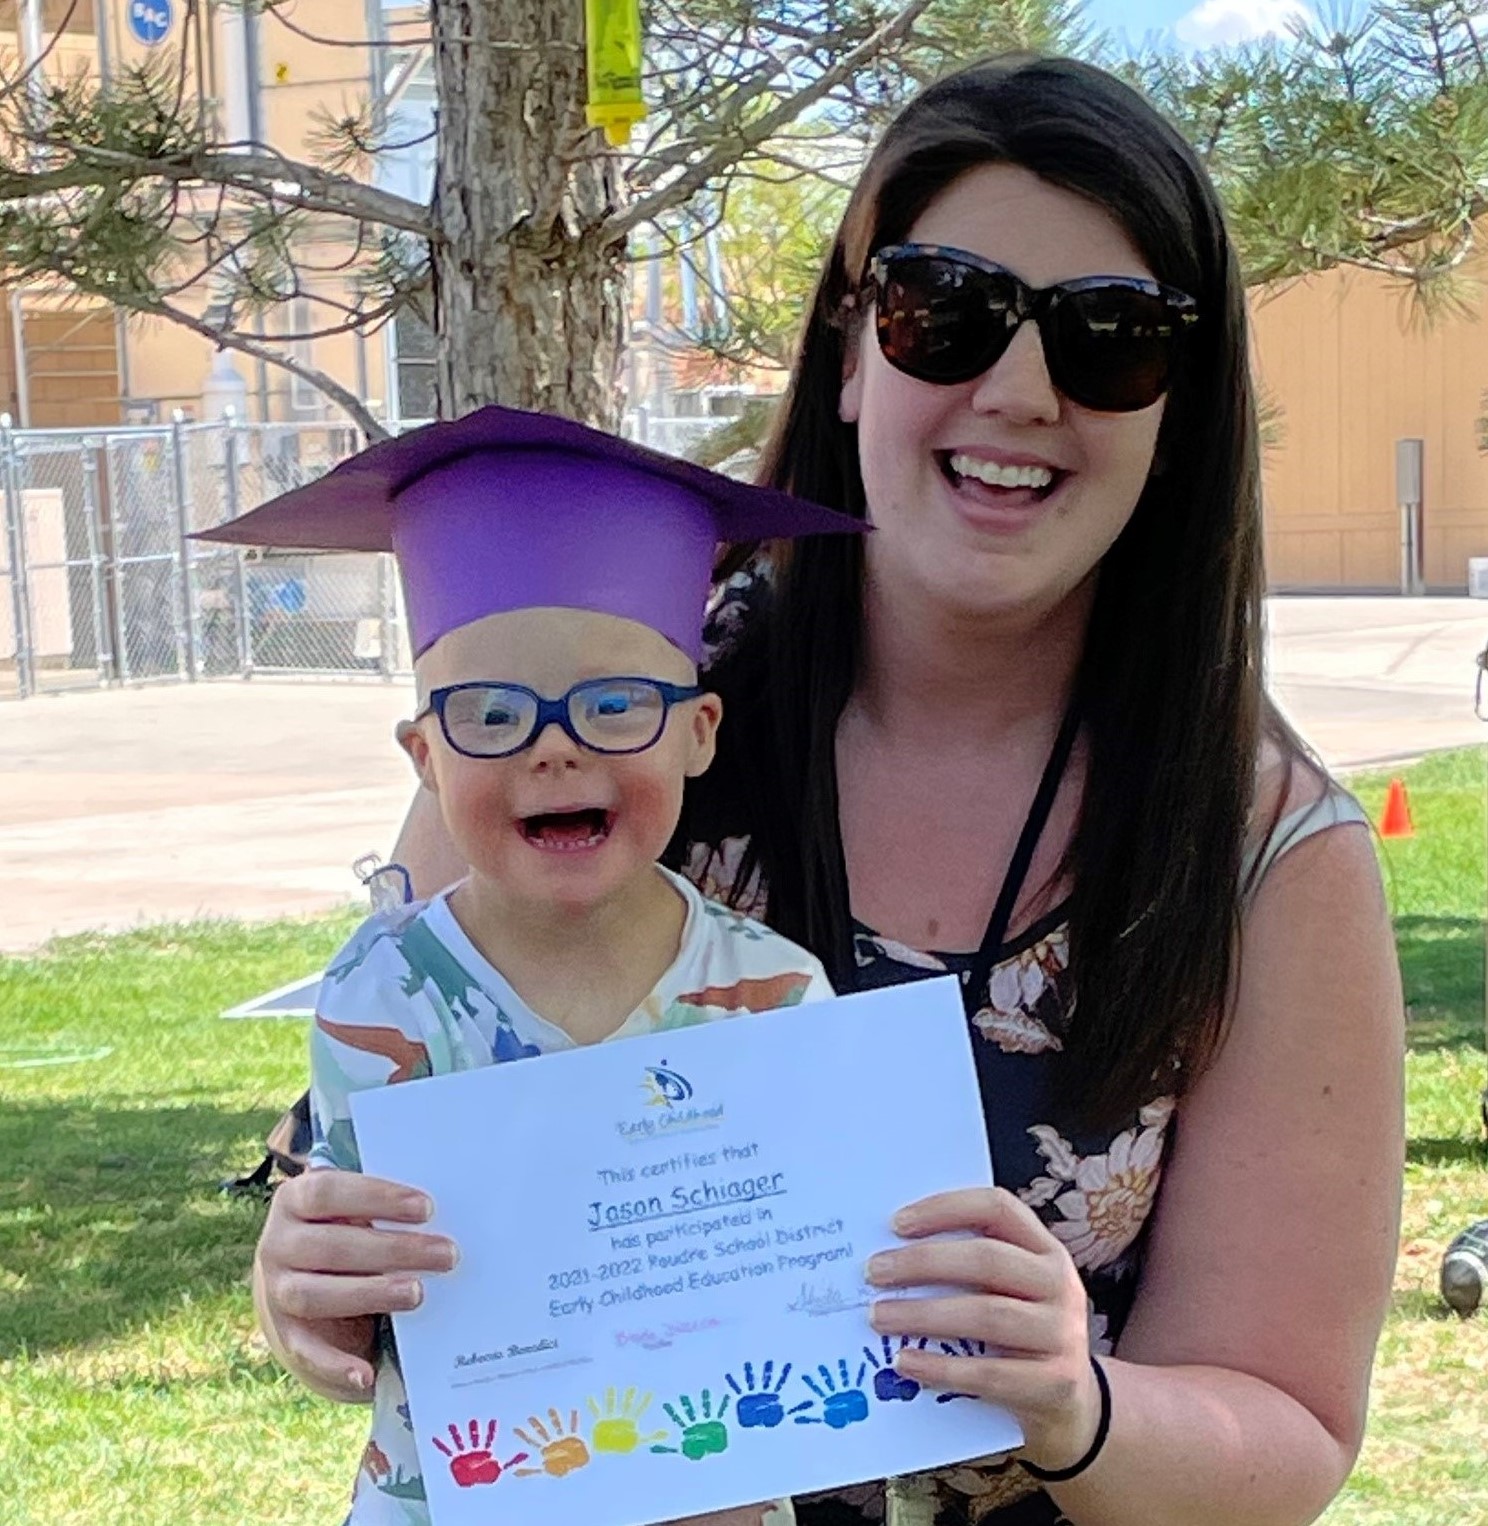 Little boy wearing a graduation cap standing in front of a woman holding his graduation certificate